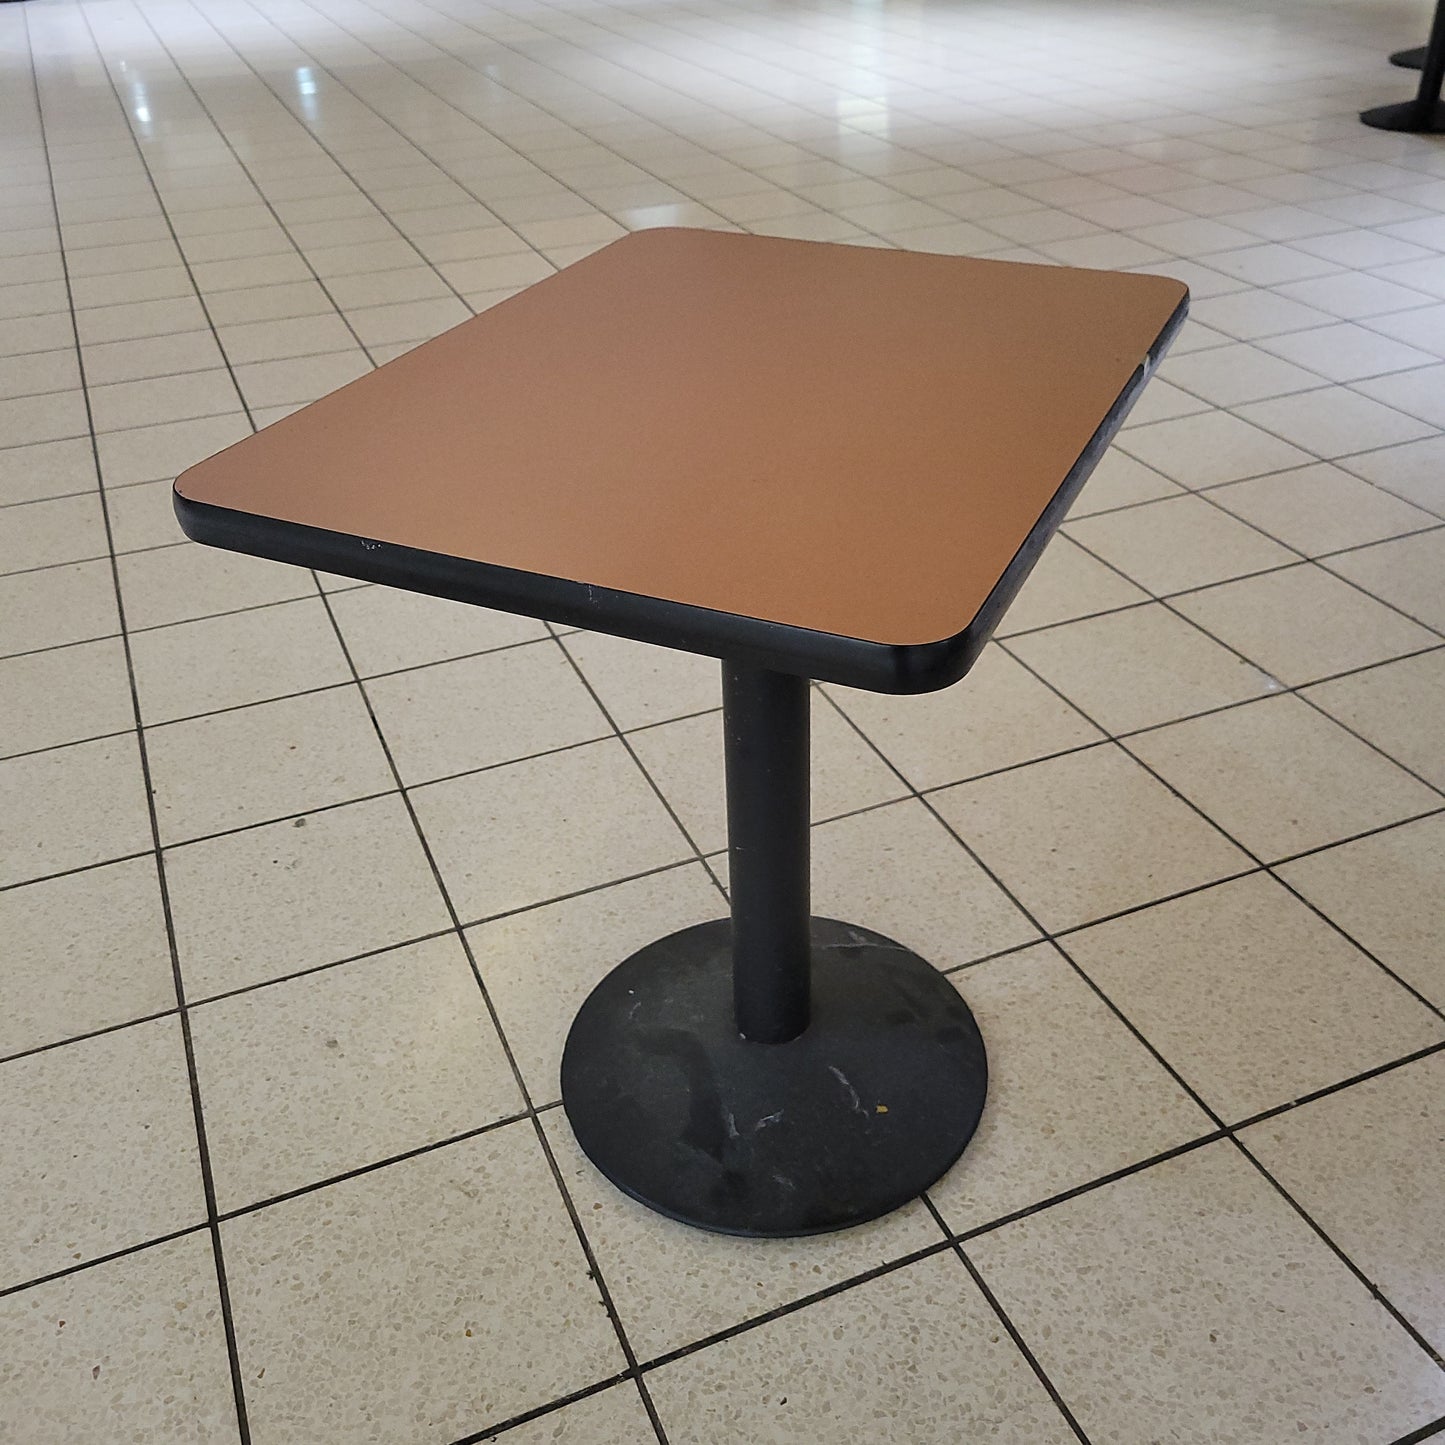 Small Commercial Tables